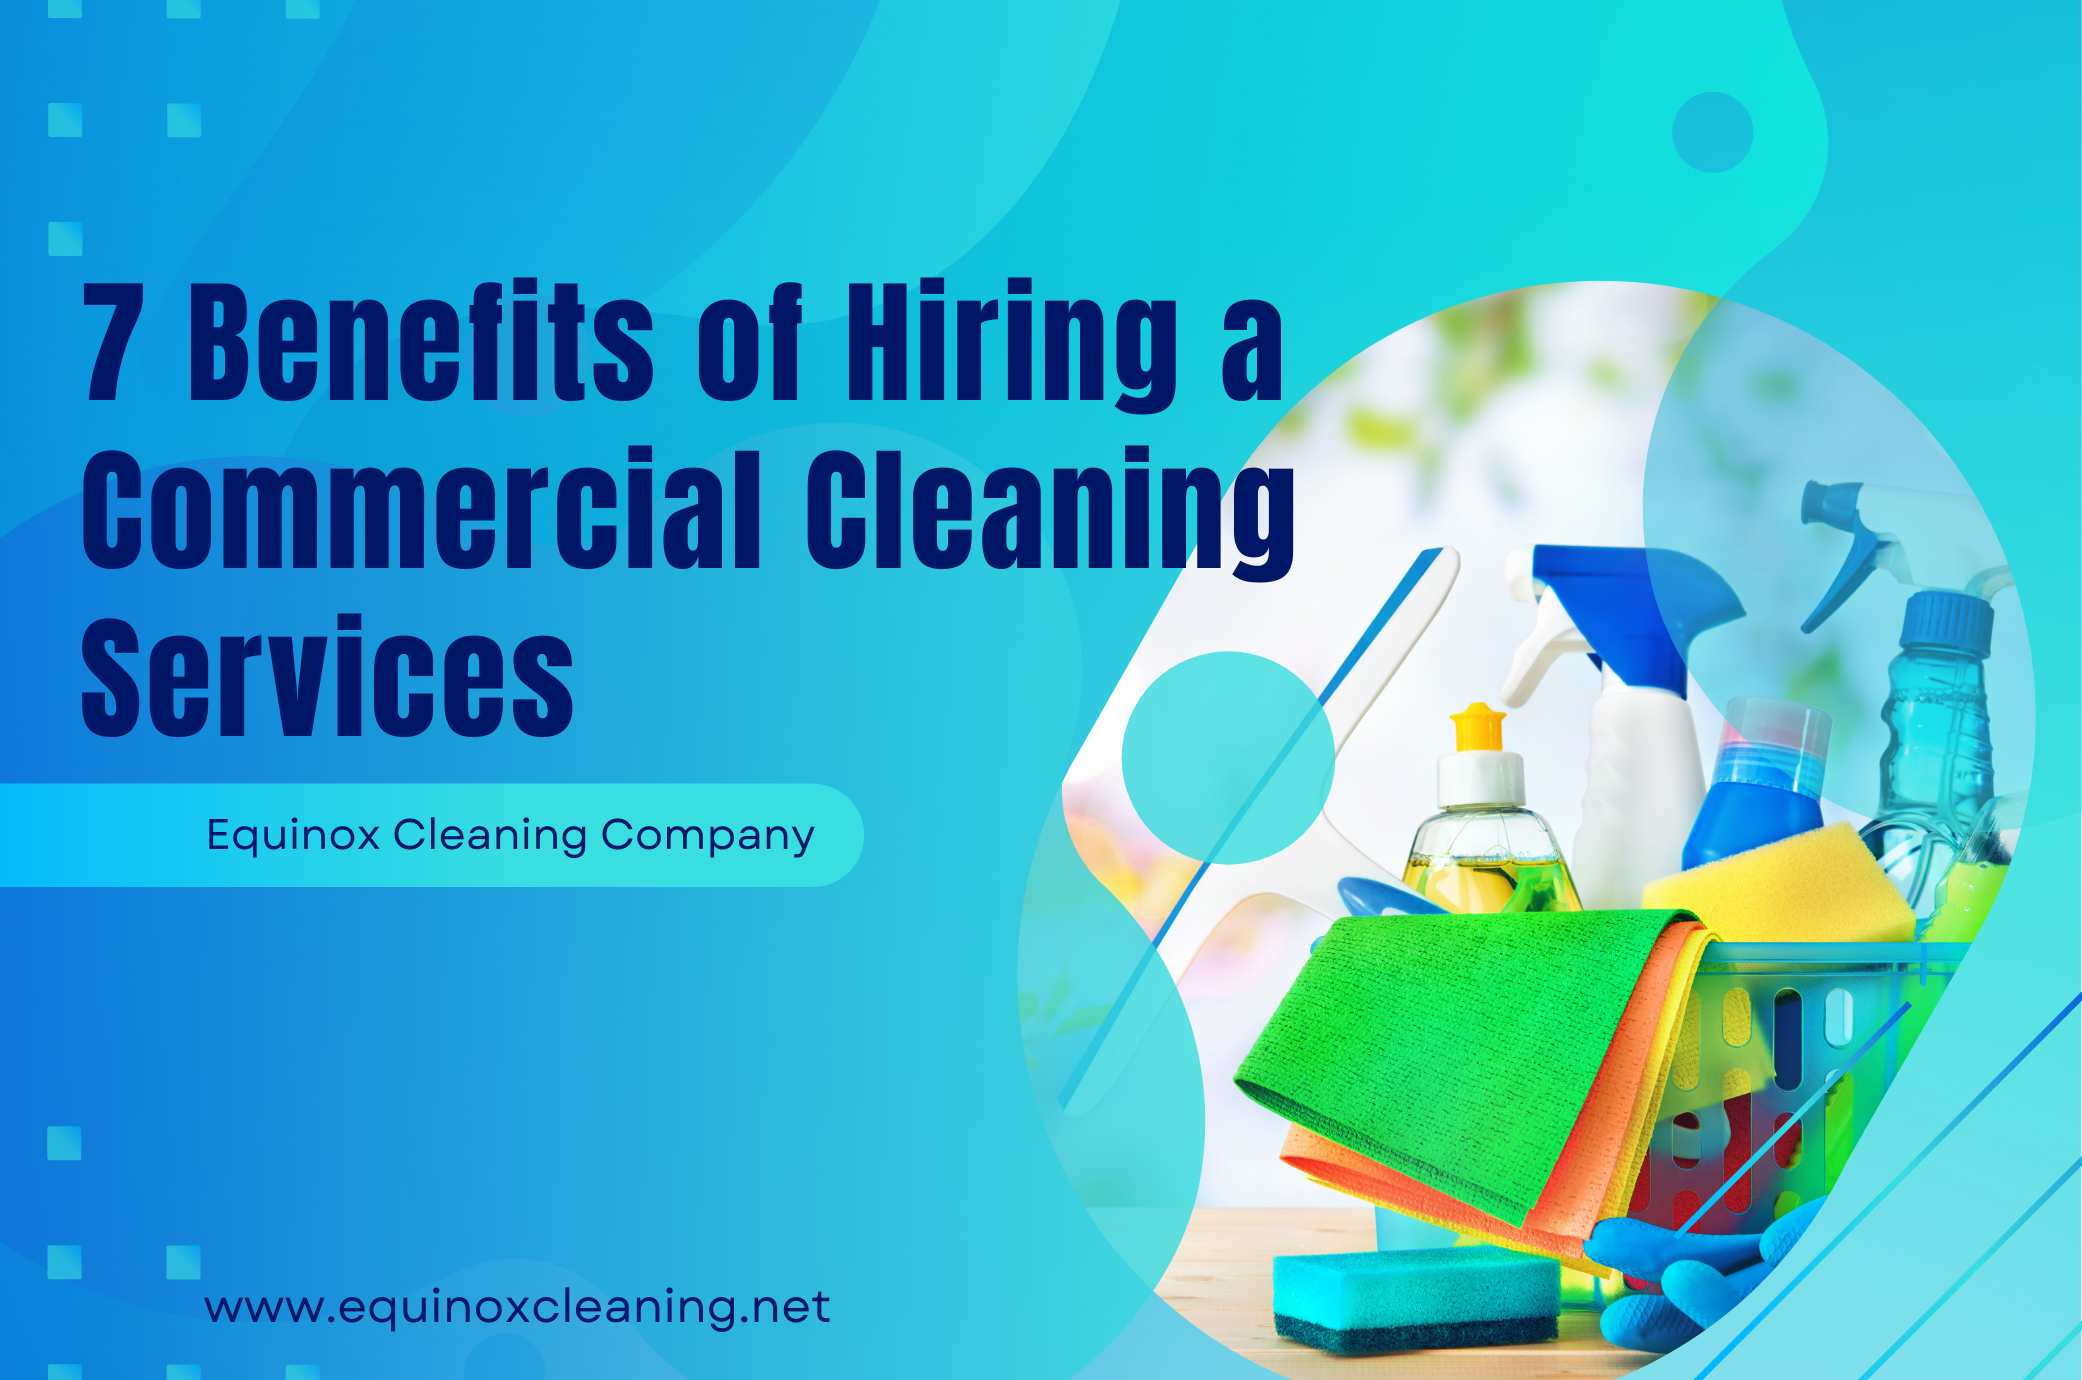 7 Benefits of Hiring a Commercial Cleaning Services